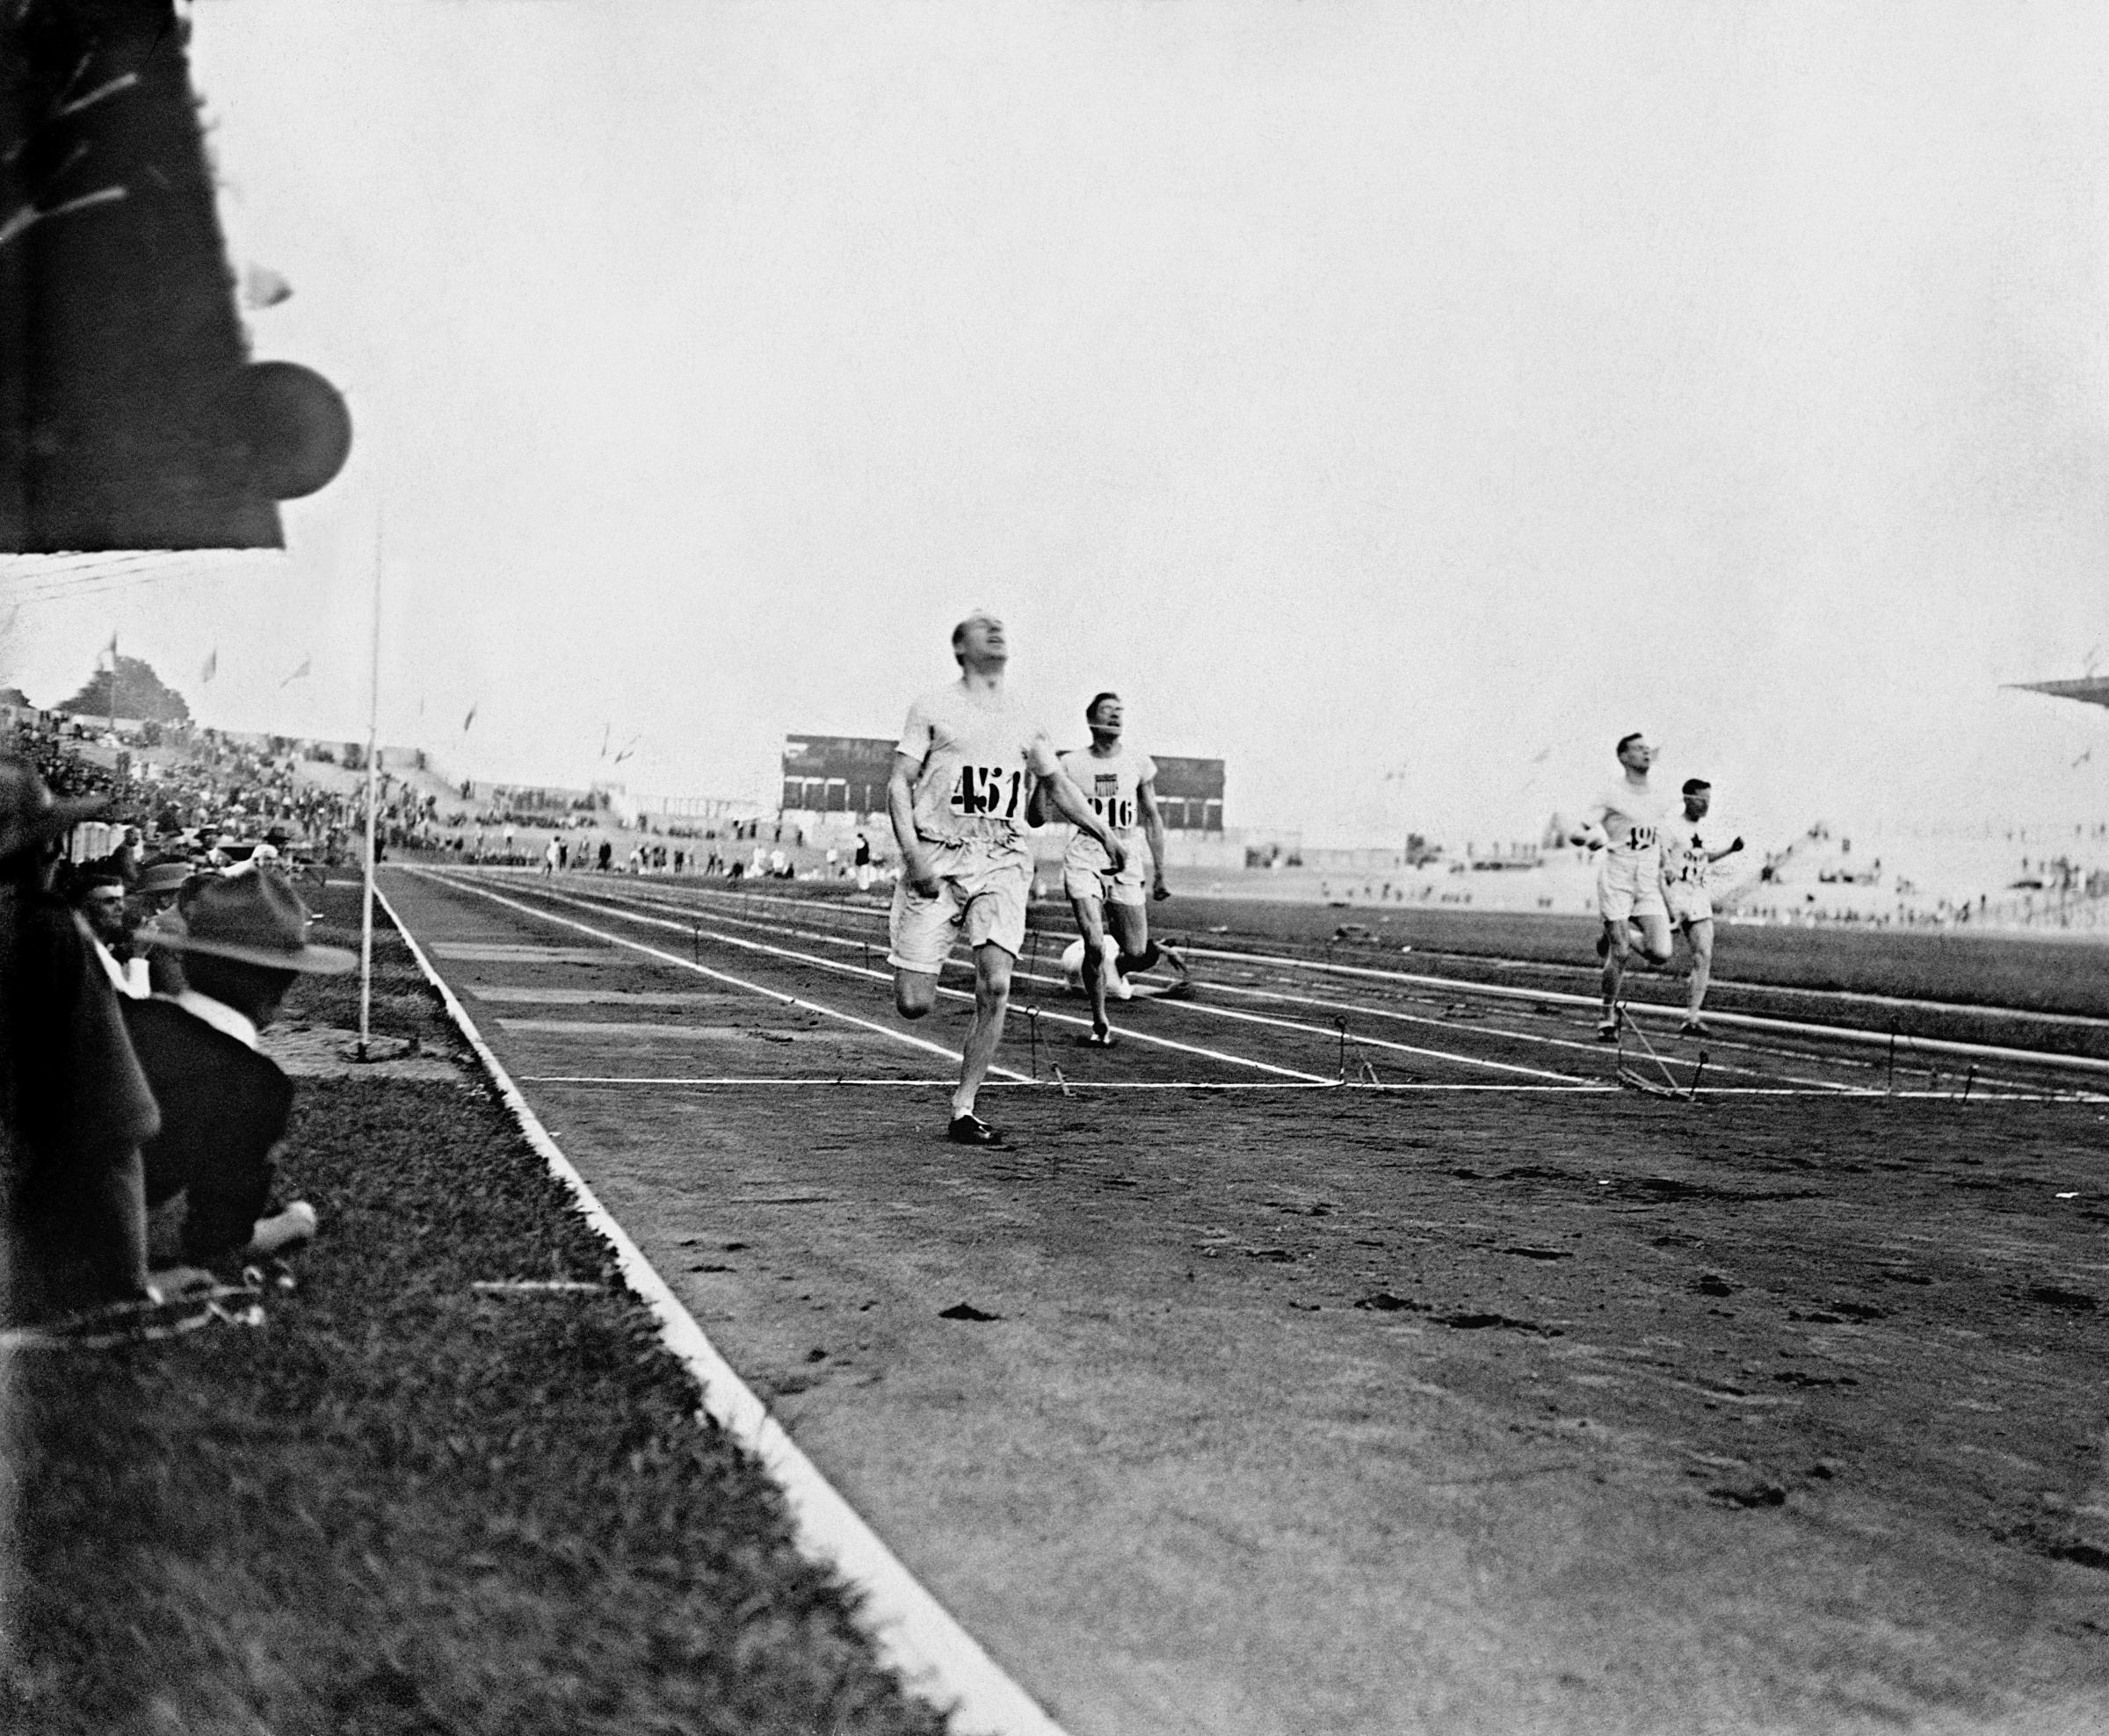 Great Britains Eric Liddell crosses the line first to win the Gold Medal. Eric Liddell was due to compete in the 100 metres race but as a committed Christian he refused to run on a sunday. He was later portrayed in the film Chariots of Fire..